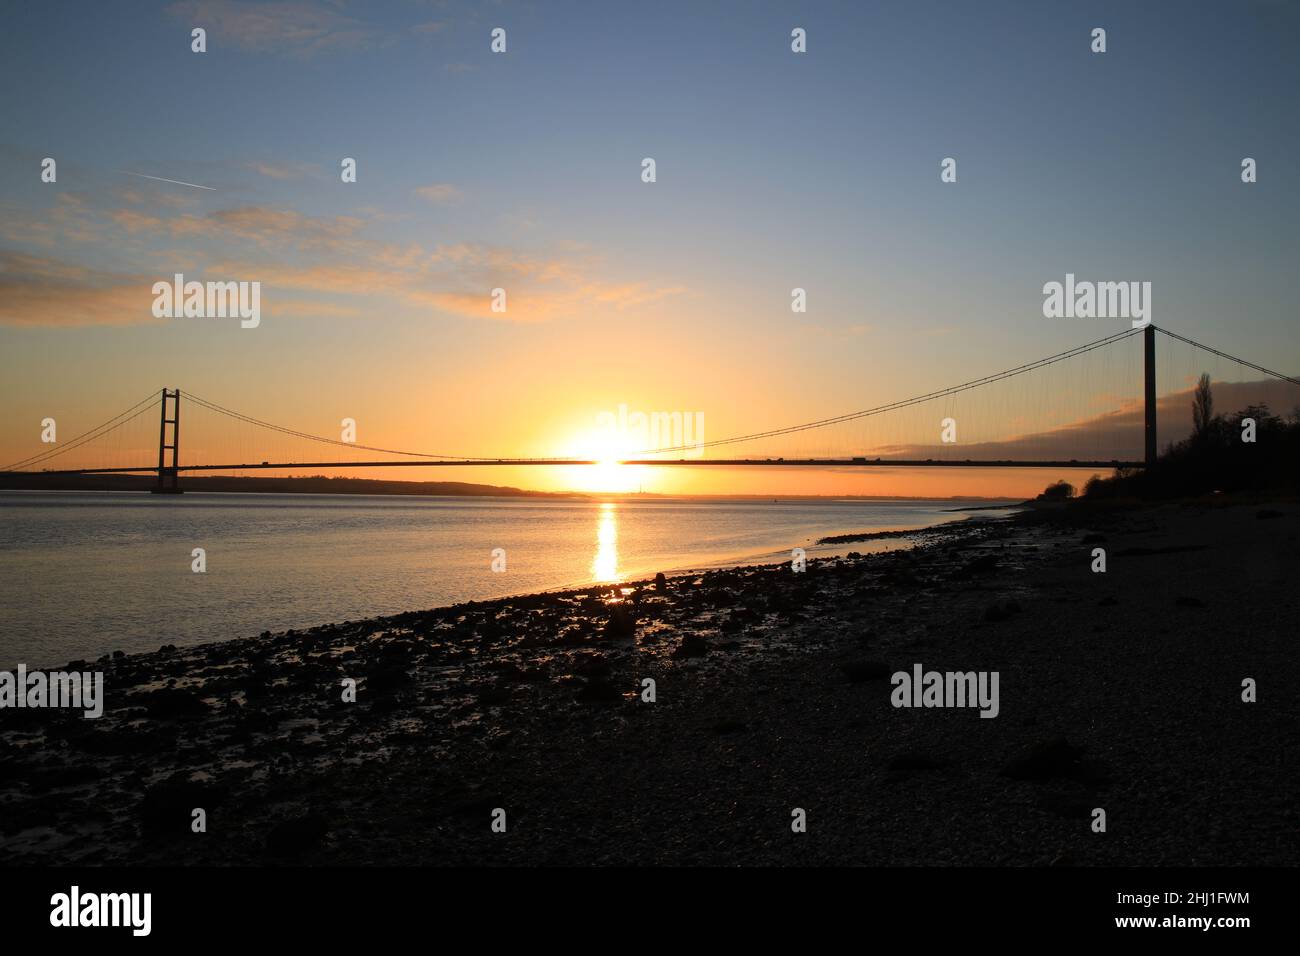 Sunset Over The Humber Bridge, East Riding Of Yorkshire. Stock Photo